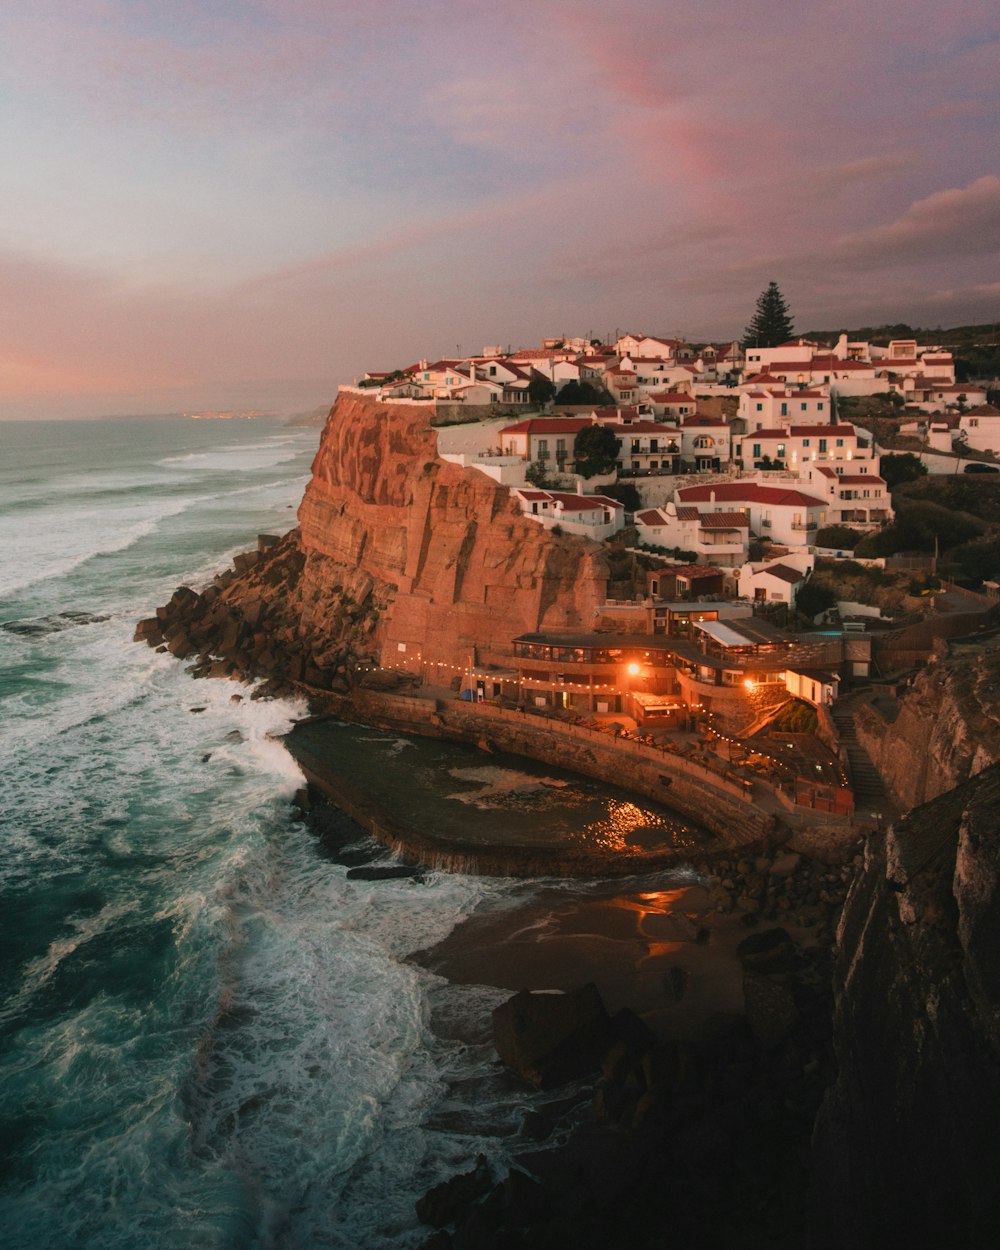 a view of a town on a cliff next to the ocean